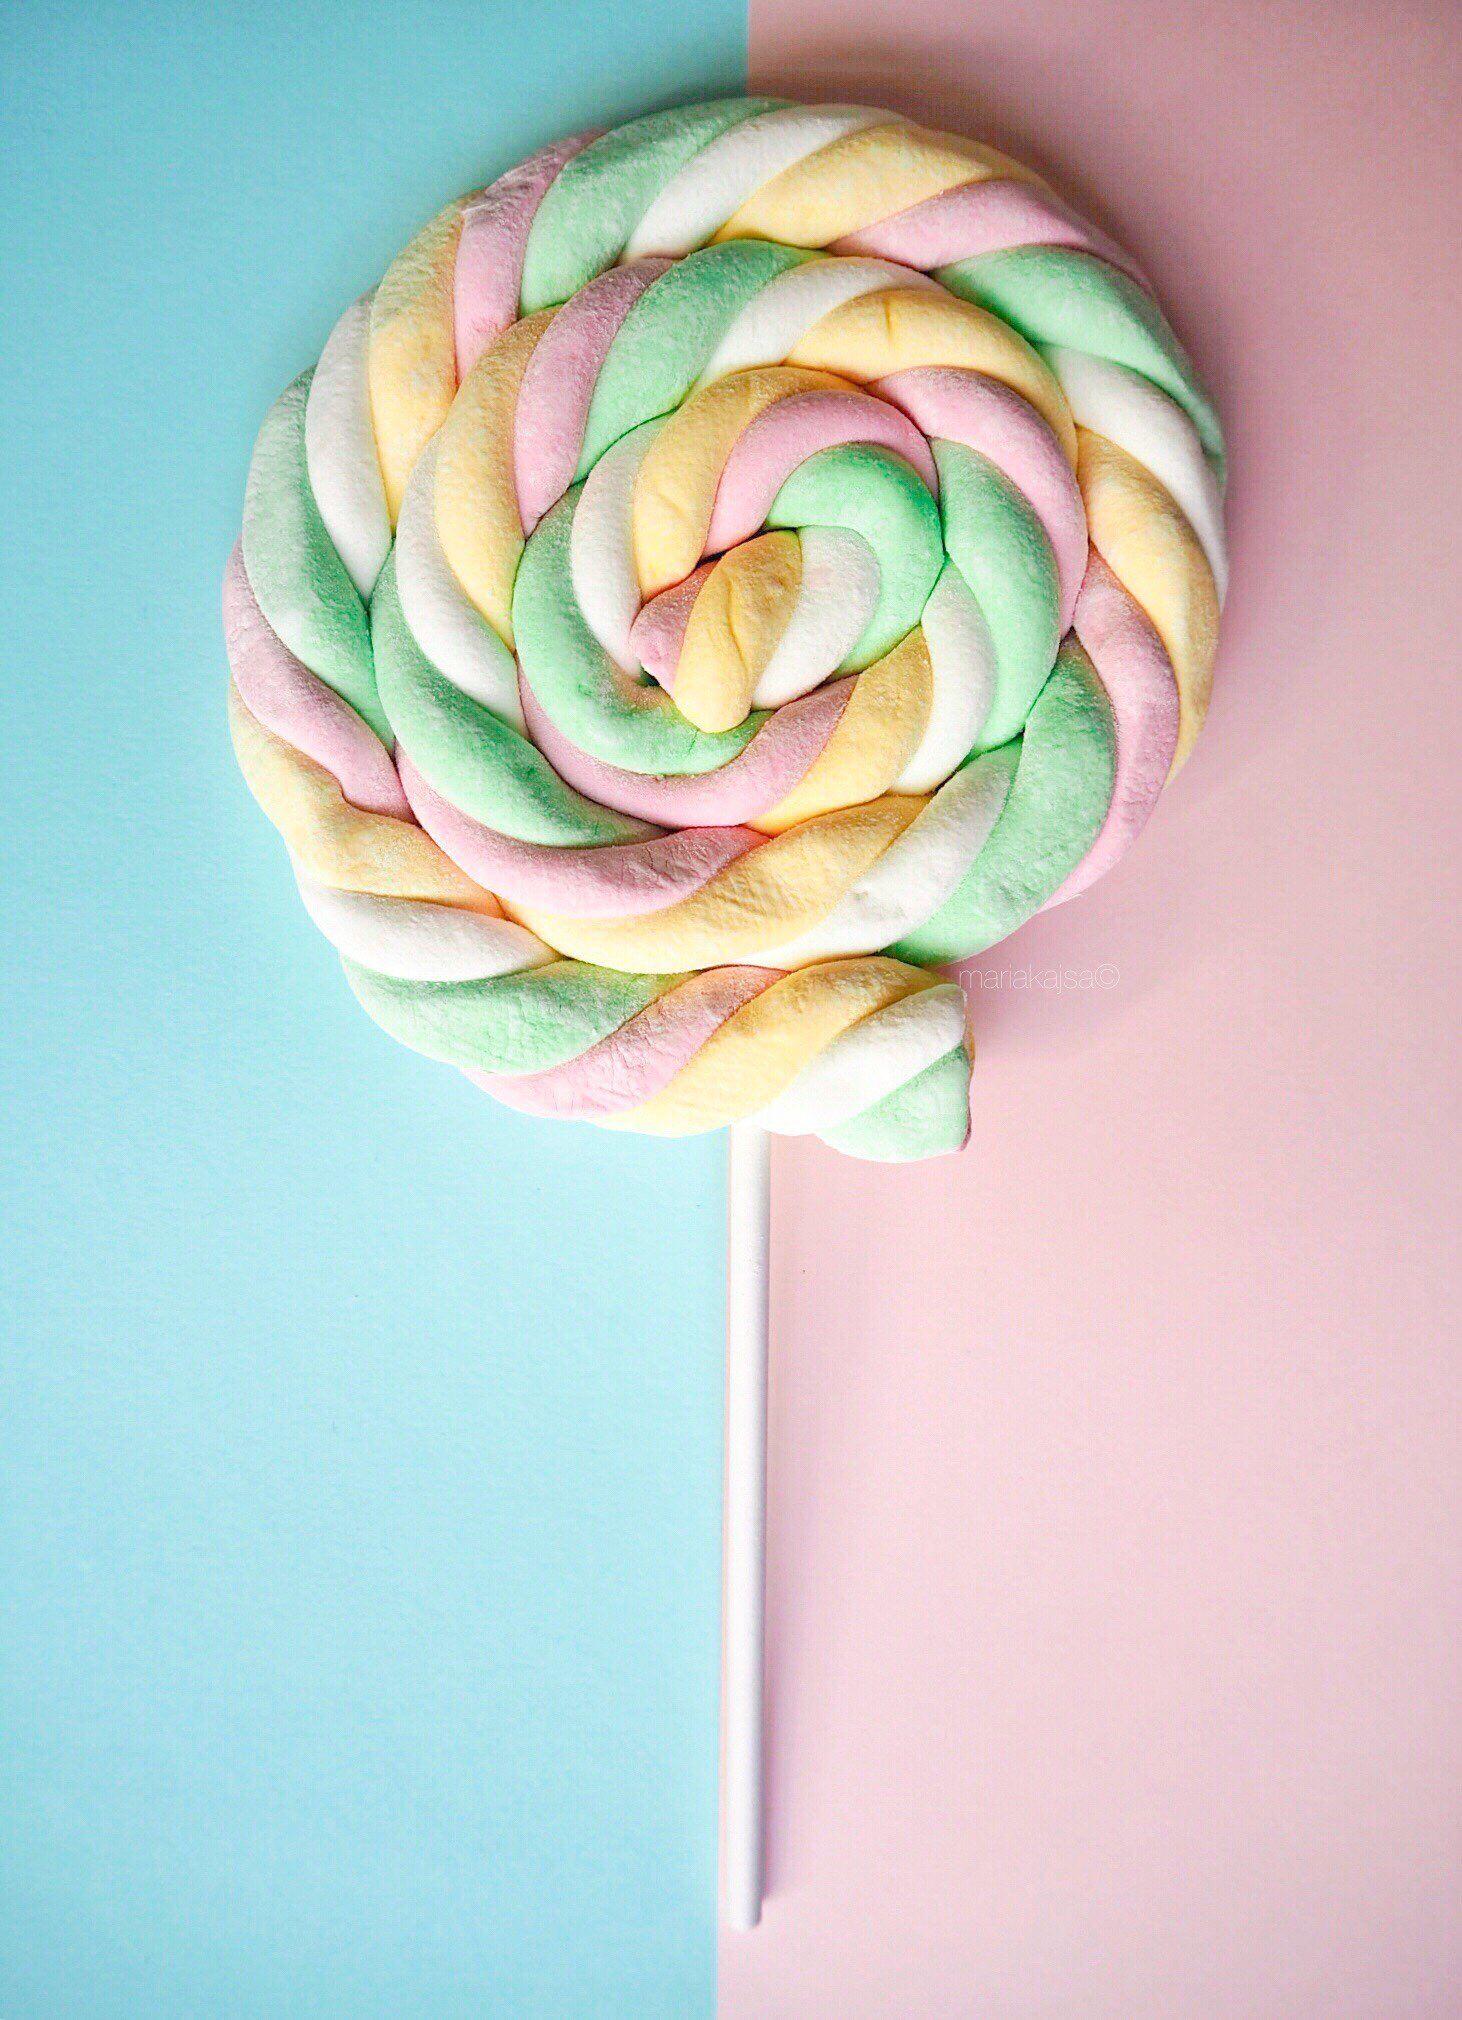 iPhone and Android Wallpaper: Pastel Candy Lollipop Wallpaper for iPhone and Android- on Ins. Pastel candy, Android wallpaper, Candy photography